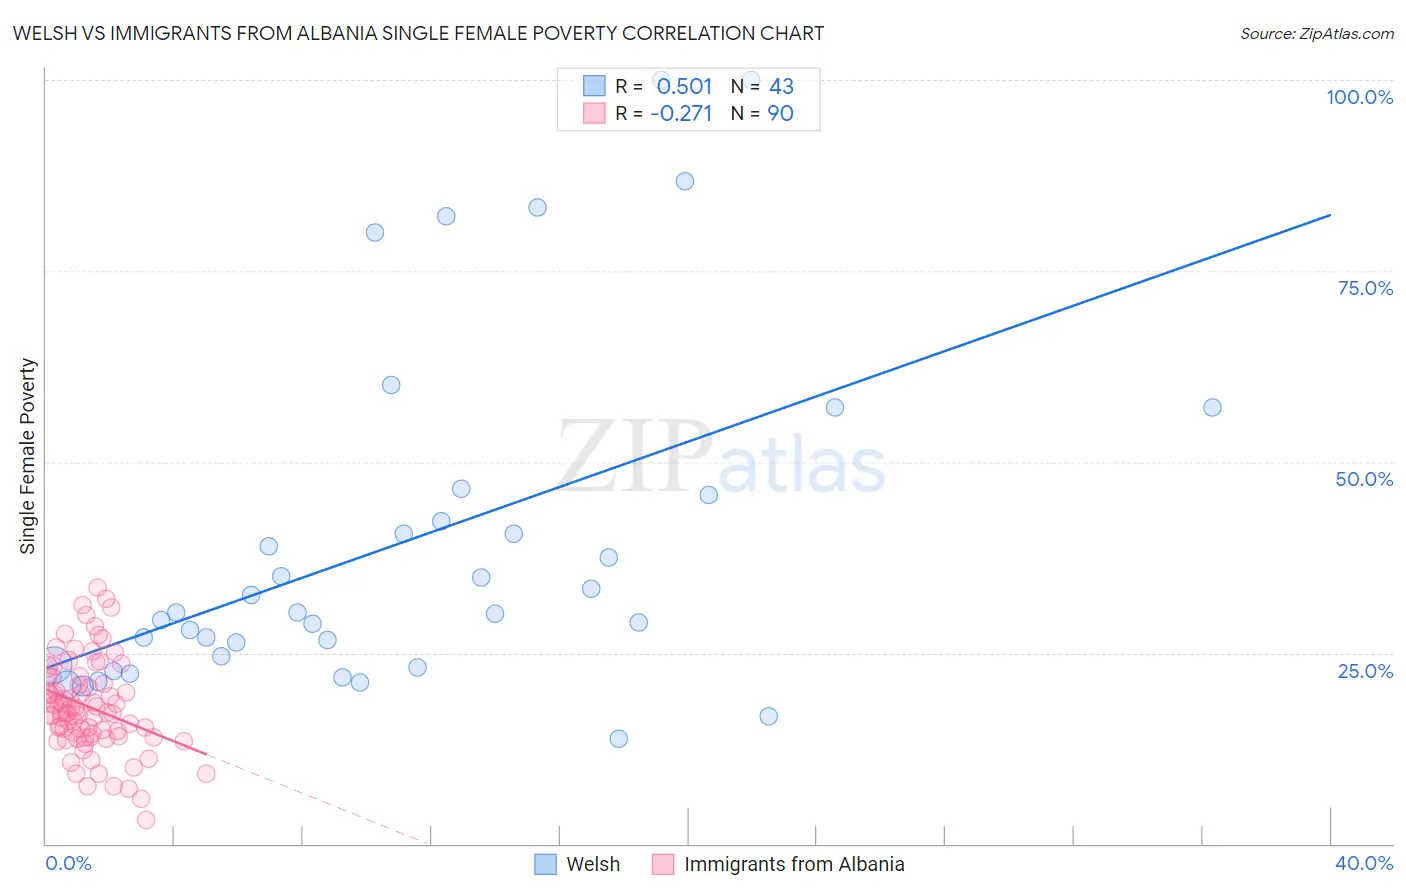 Welsh vs Immigrants from Albania Single Female Poverty